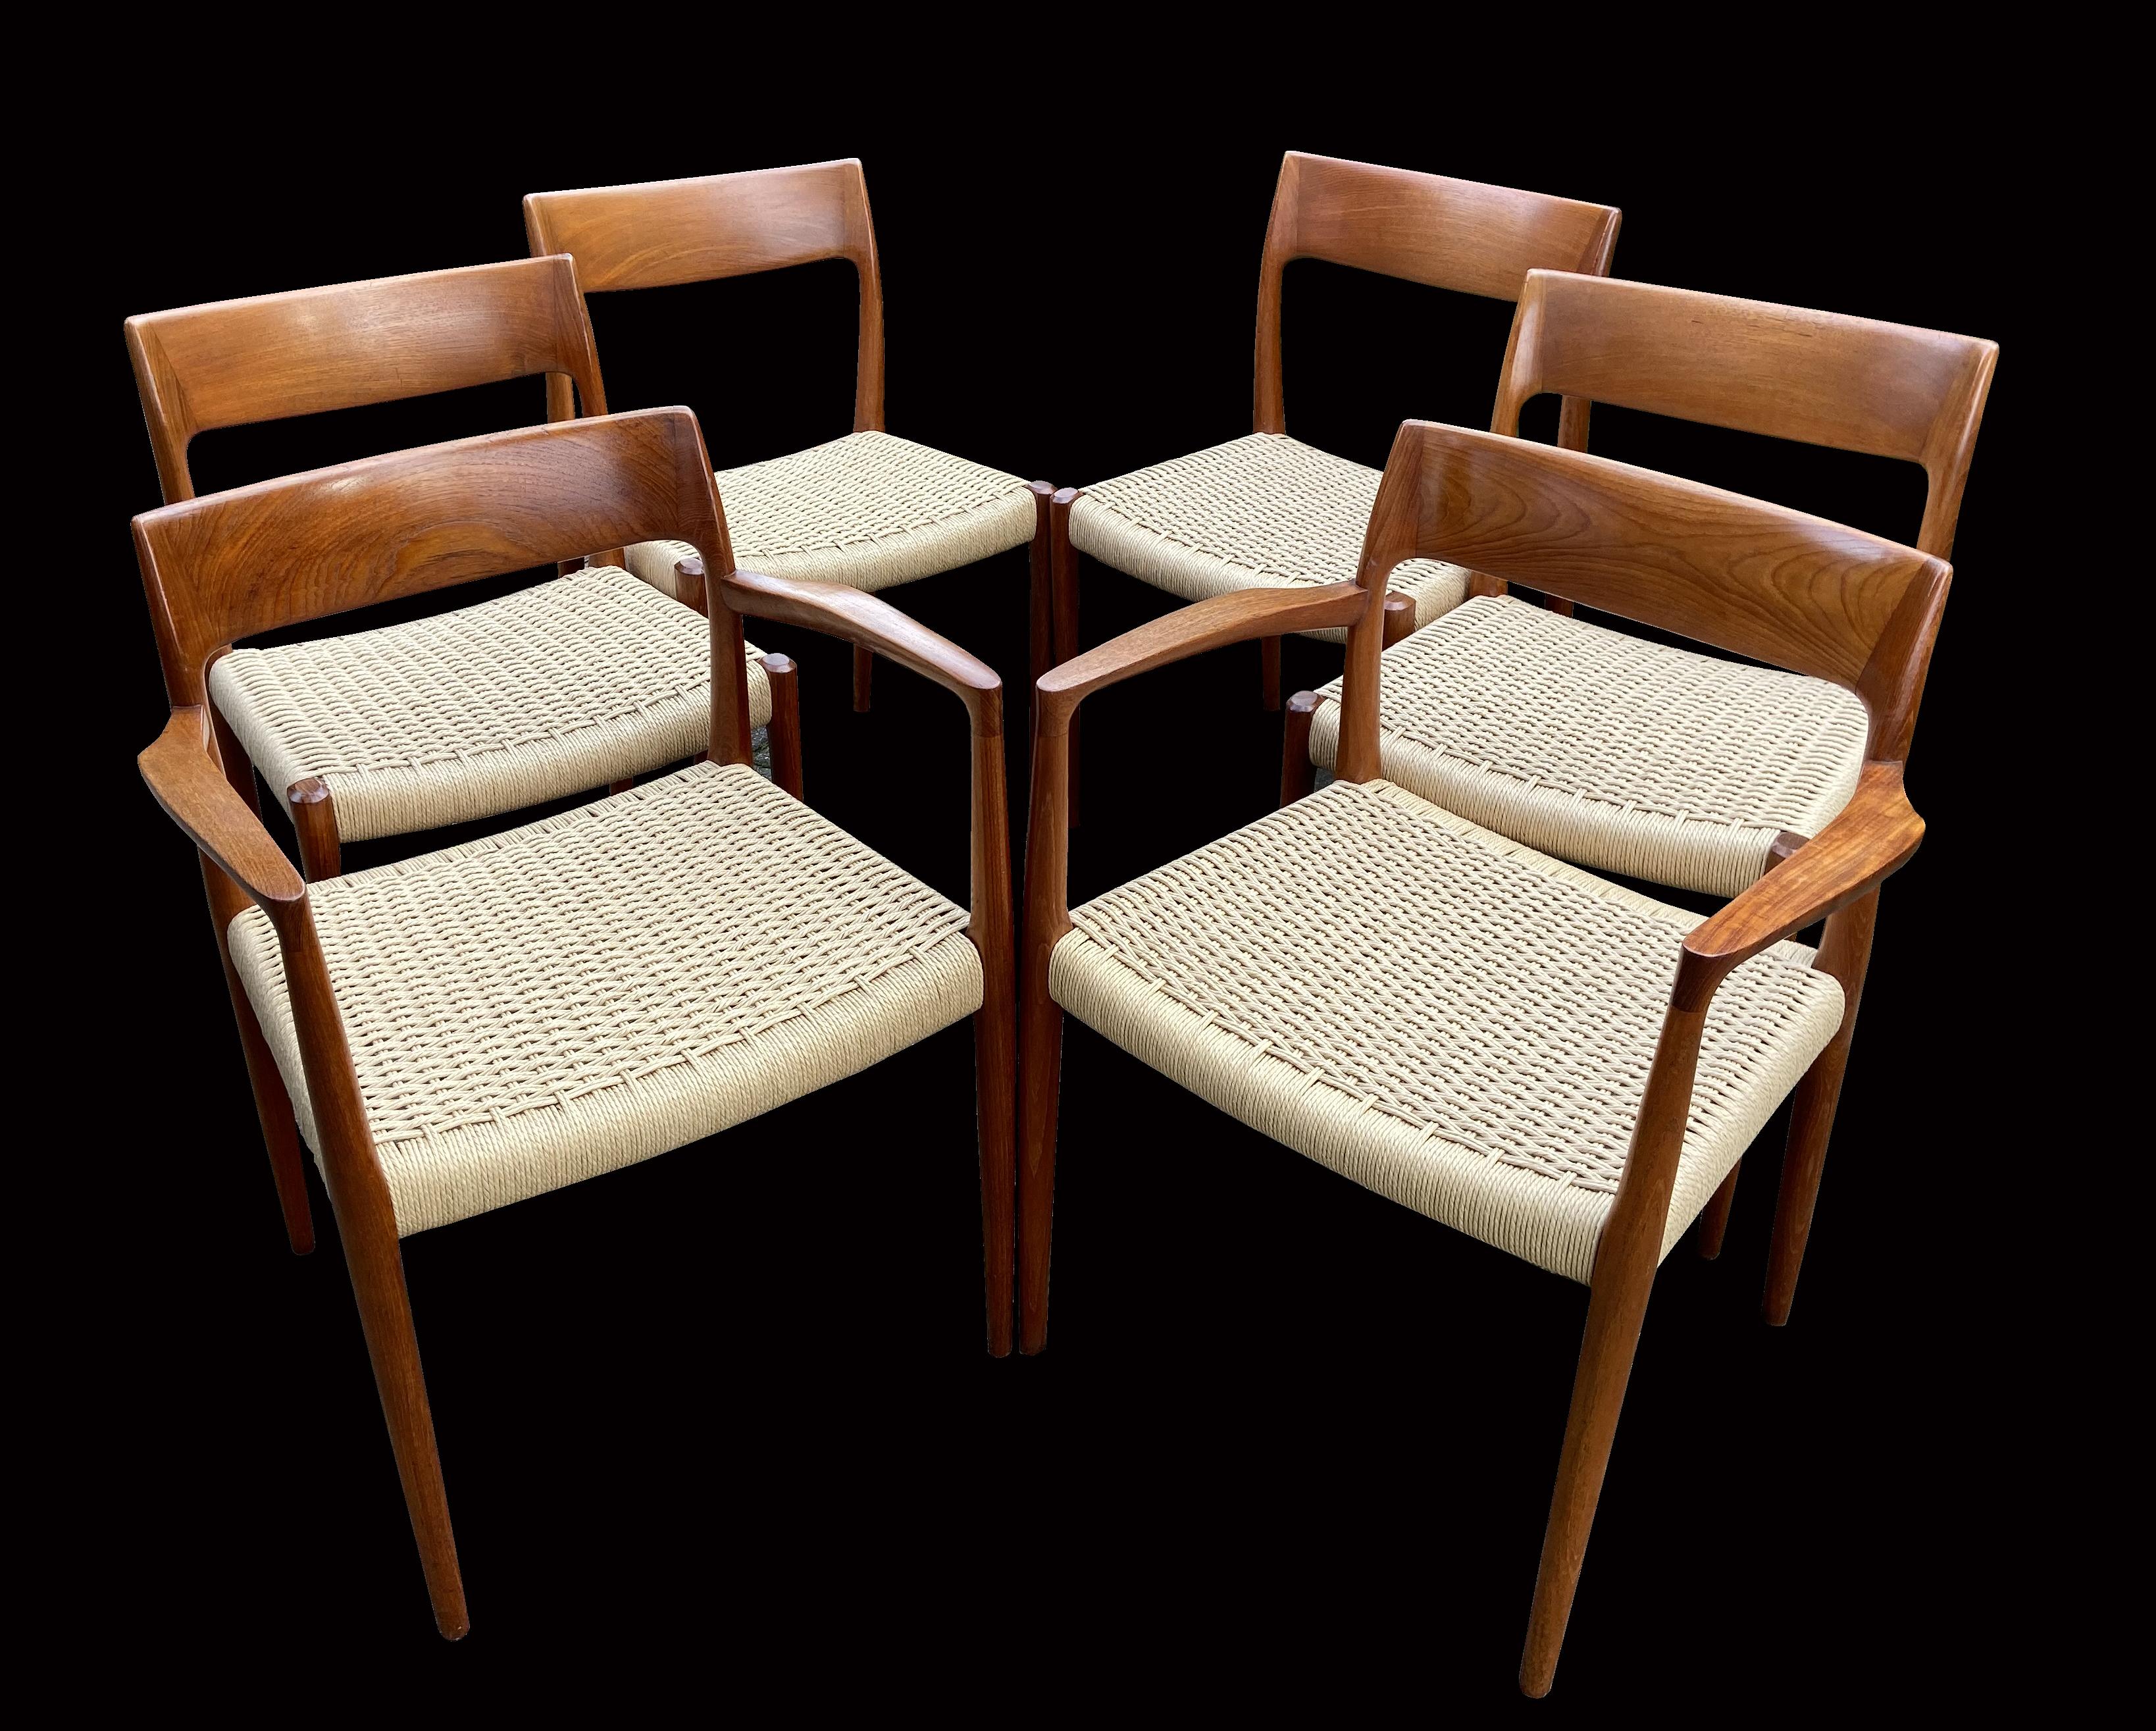 These are a fabulous and early original set of diners by the most famous dining chair designer Niels O. Moller, they are called model 77 ( The ones with no arms) and model 57 (the arm version).
They were designed circa 1950s and these were probably